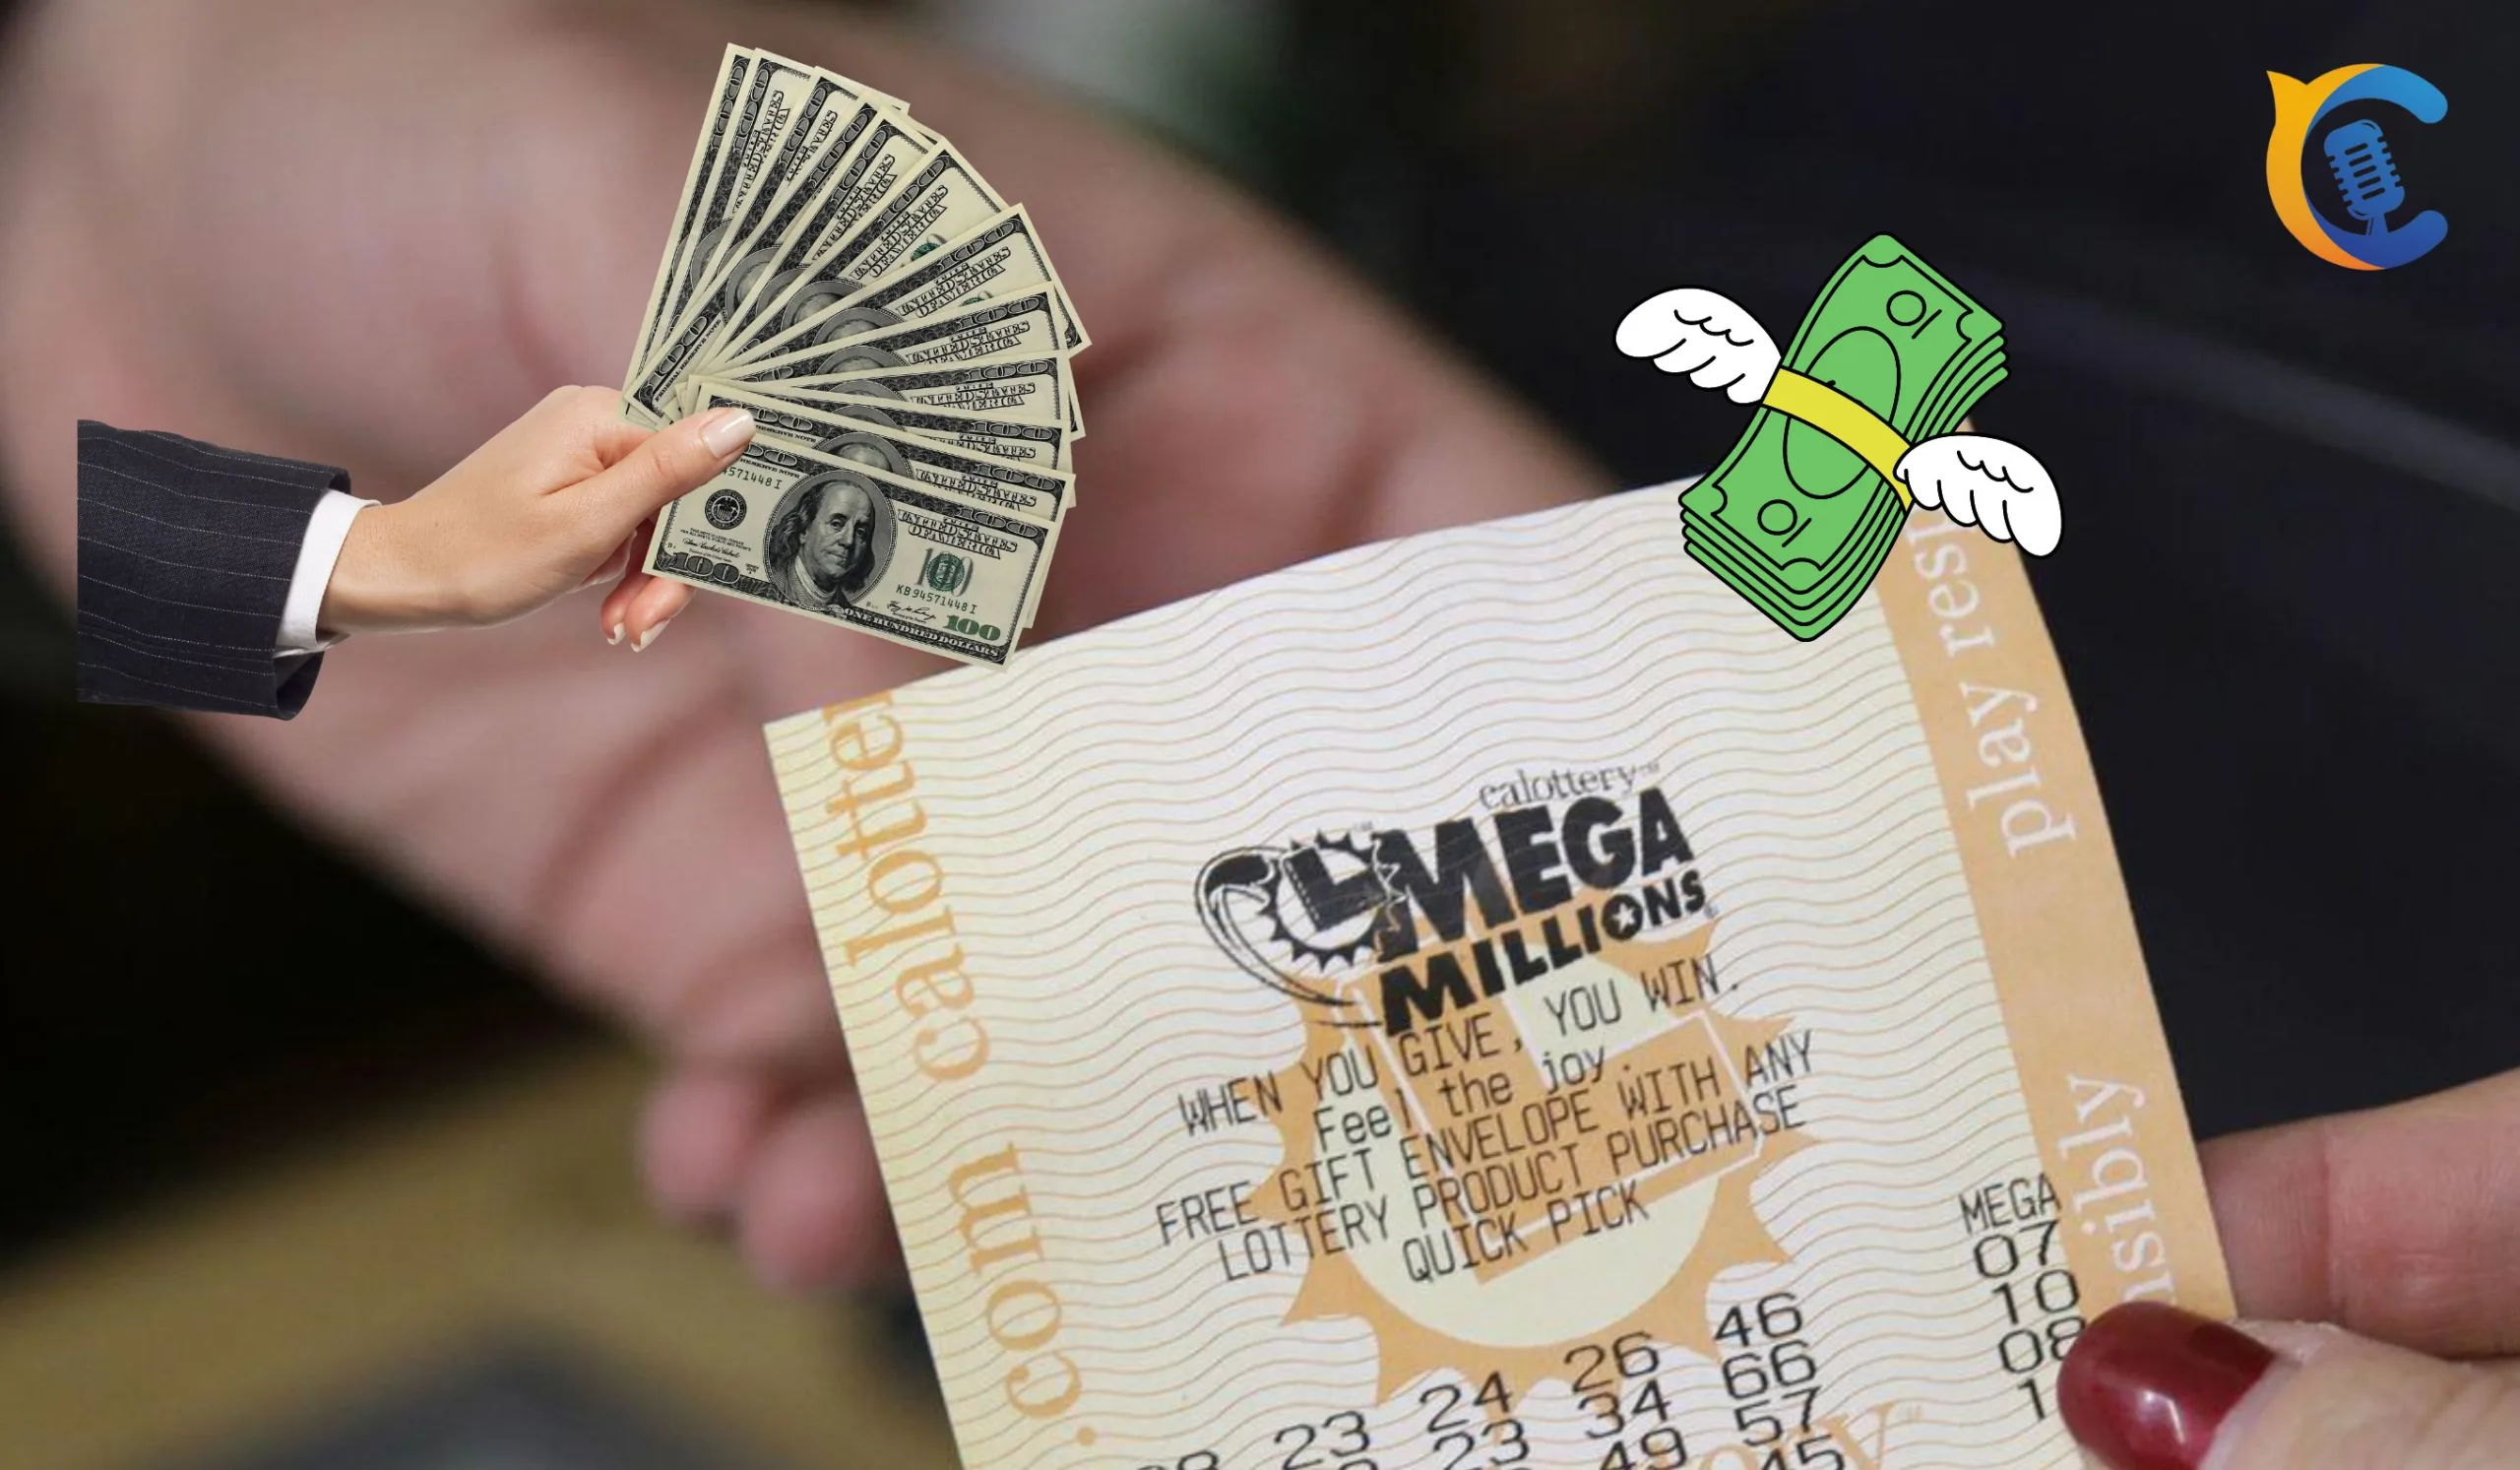 The Mega Millions Jackpot Reaches $1.1 Billion - One of the Largest Prizes in Lottery History!